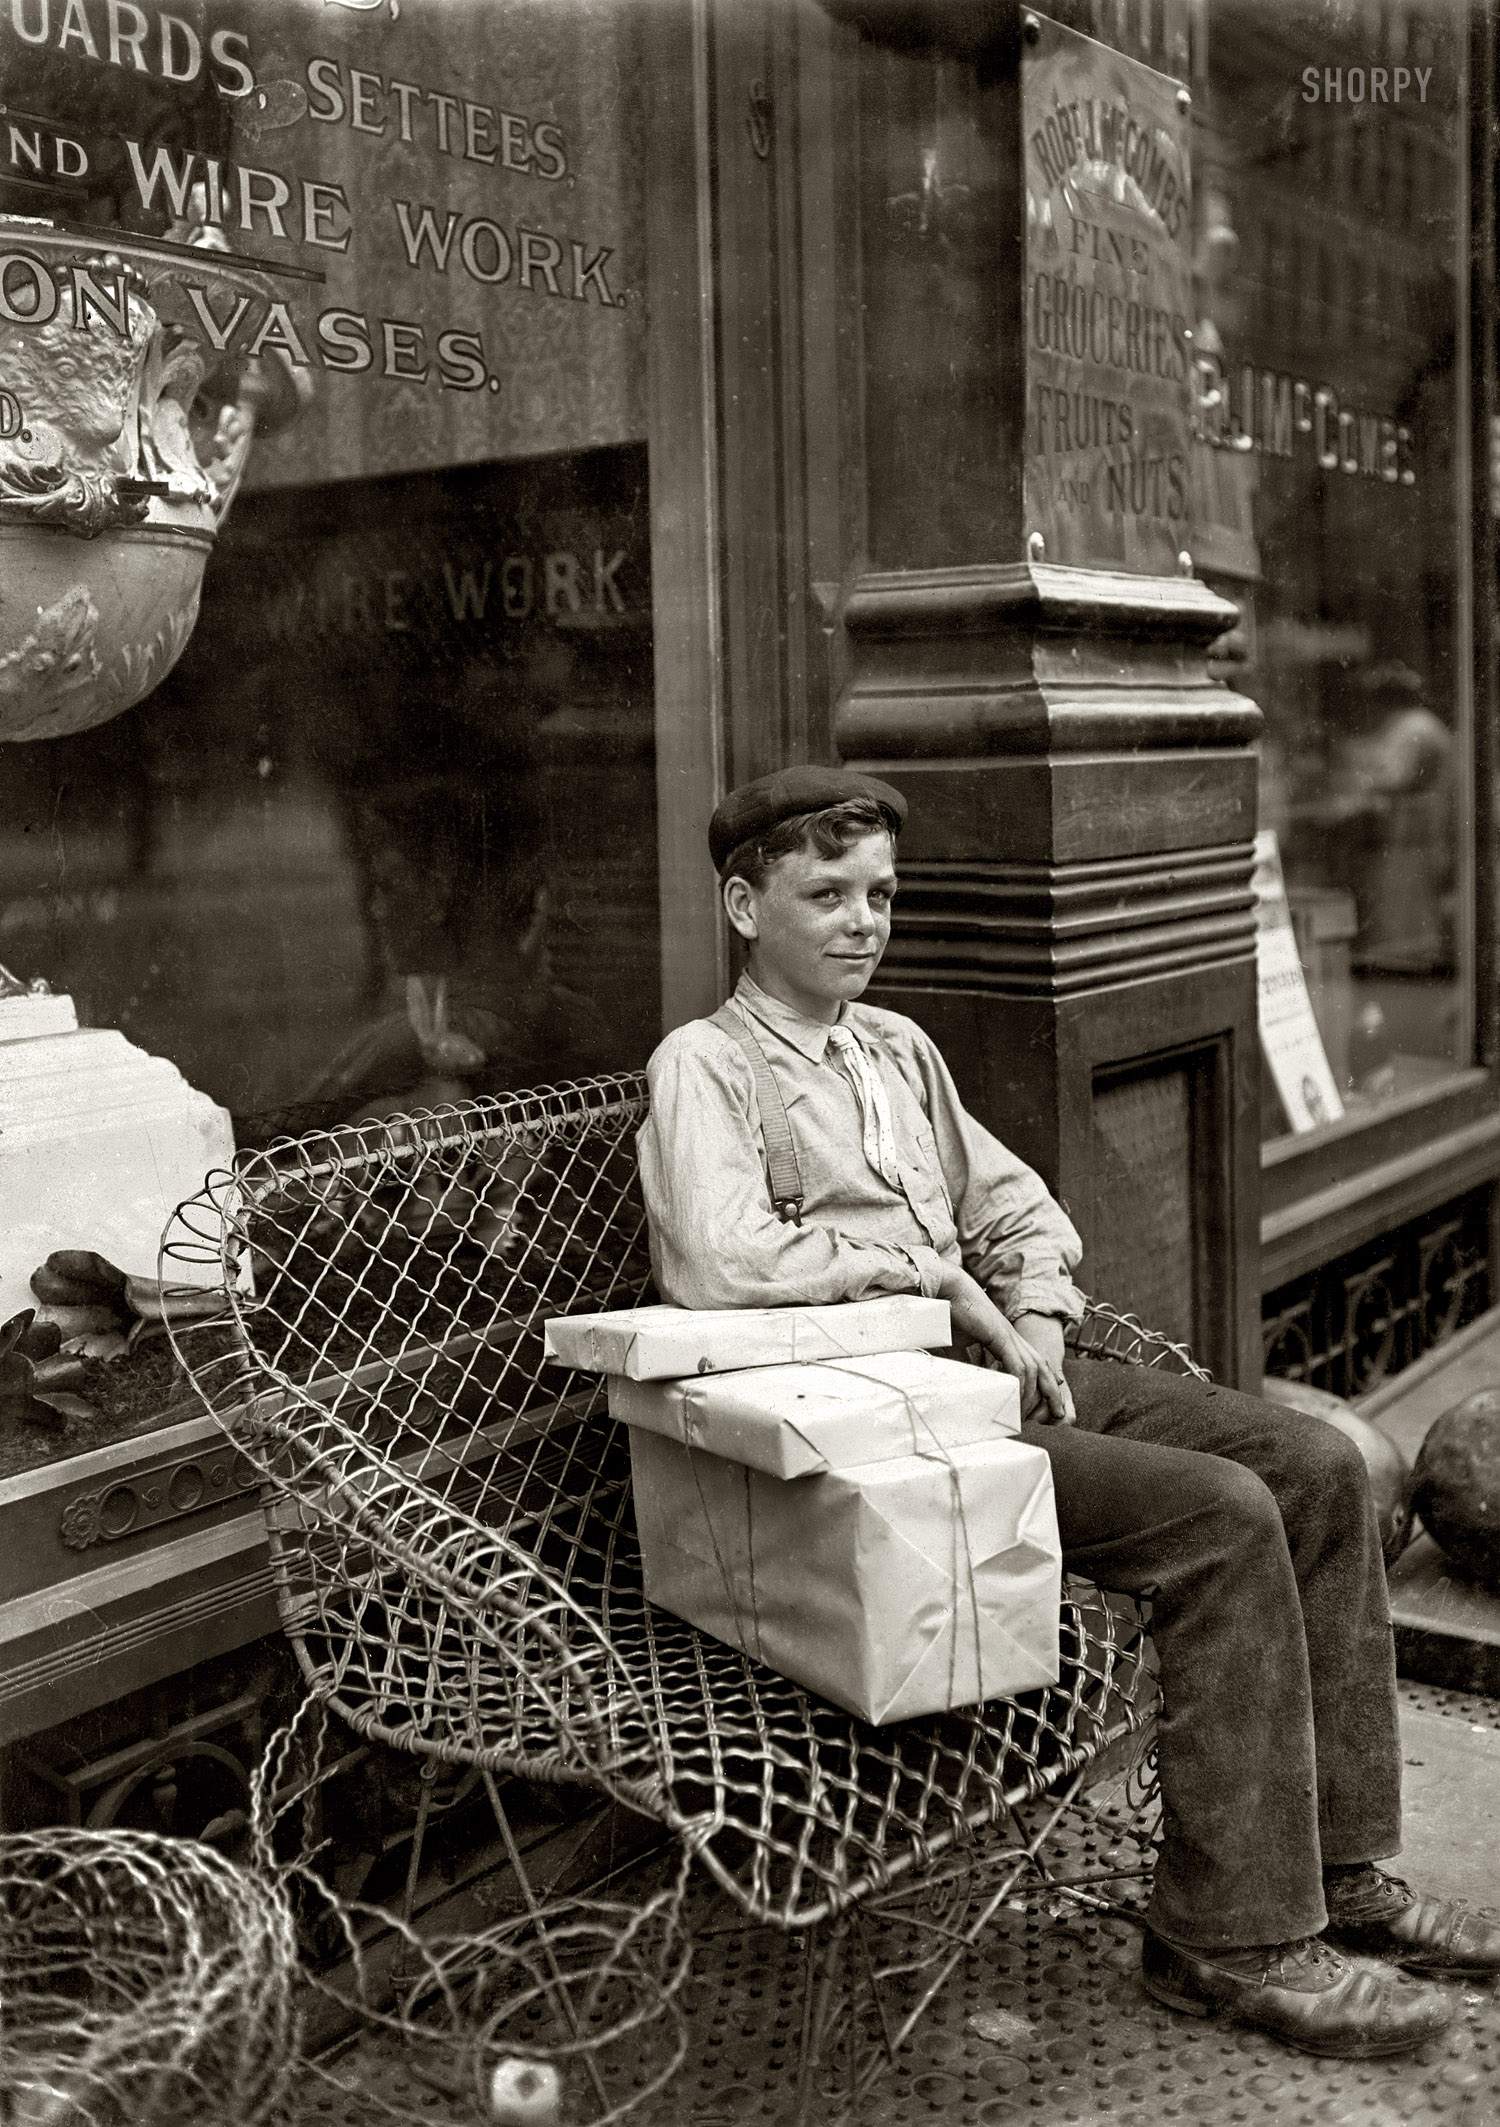 August 1908. "An Enforced Rest. Harry Swope, aged 15, 426 Elm Street, Newport, Kentucky. Carrying heavy bundles of paper for a News & Stationery company." Photo and caption by Lewis Wickes Hine. View full size.